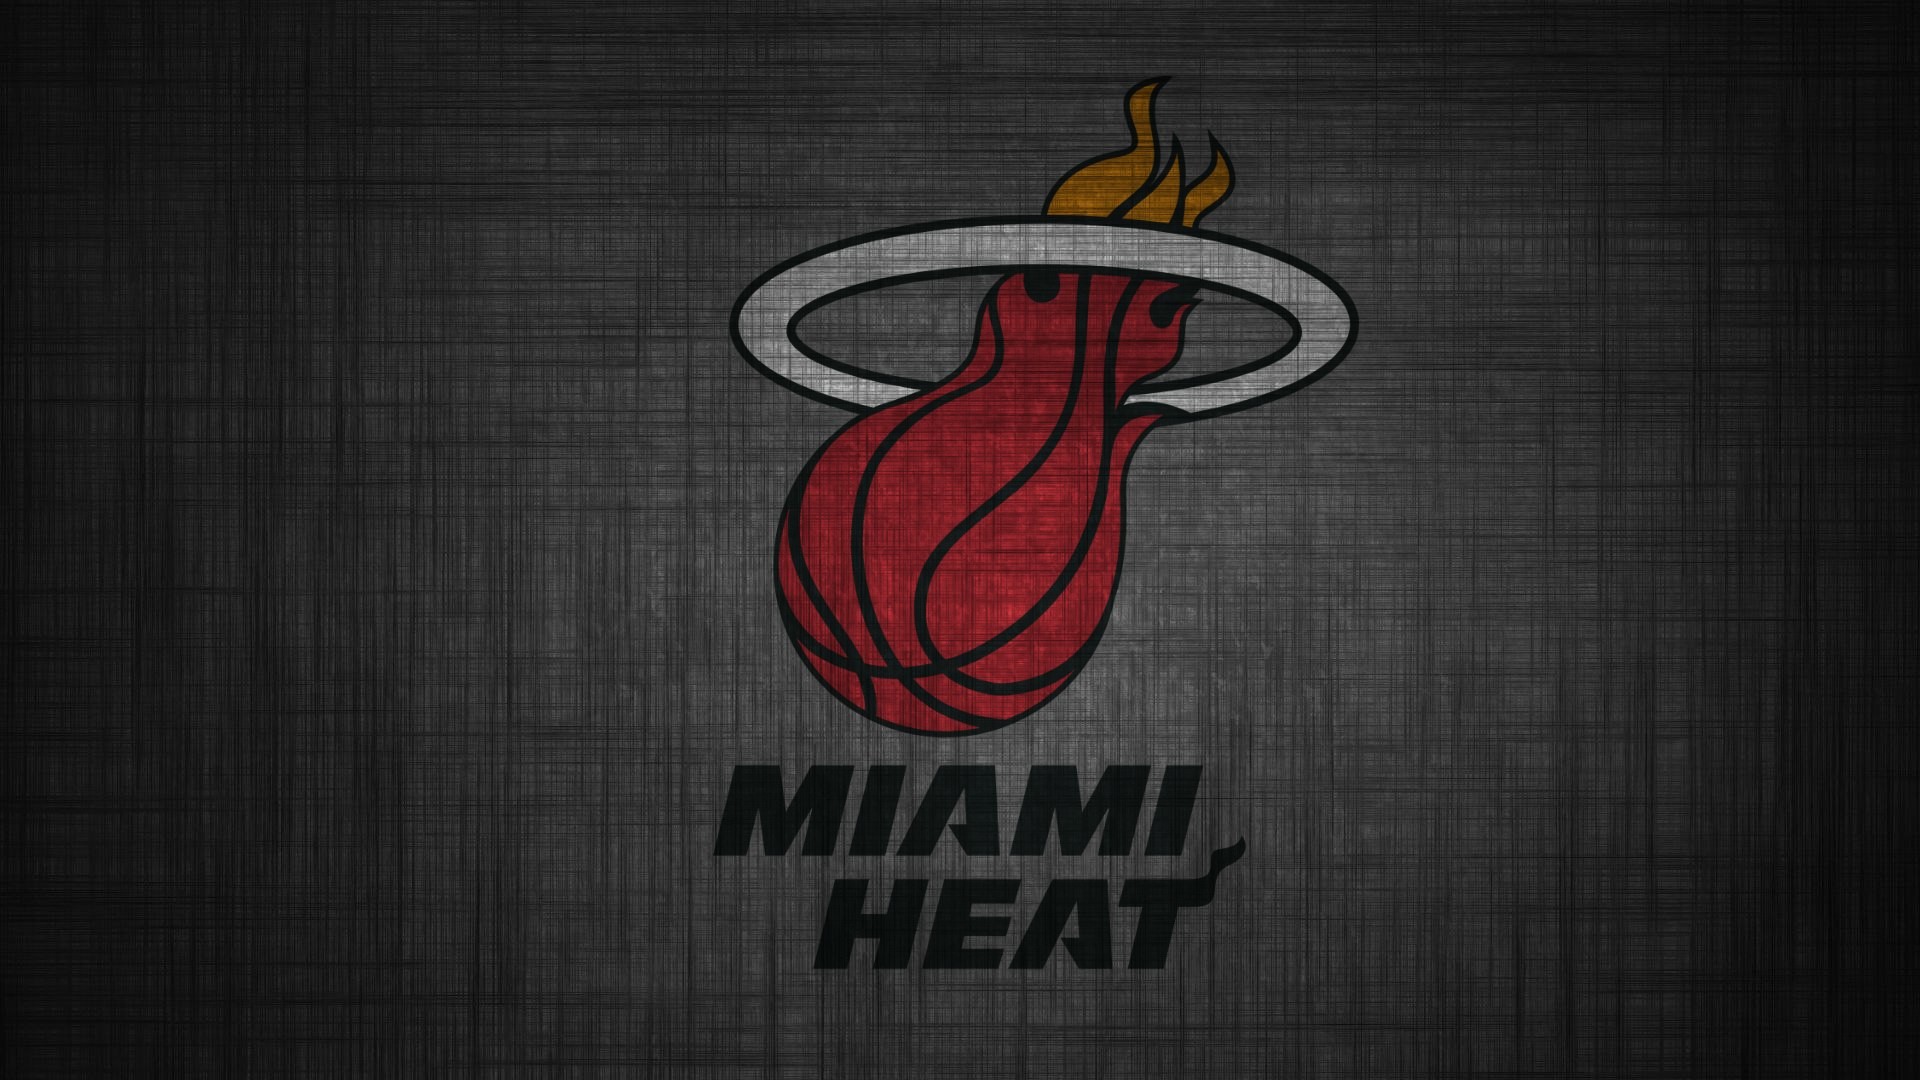 miami heat wallpaper for desktop background 1080P 2k 4k HD wallpapers  backgrounds free download  Rare Gallery